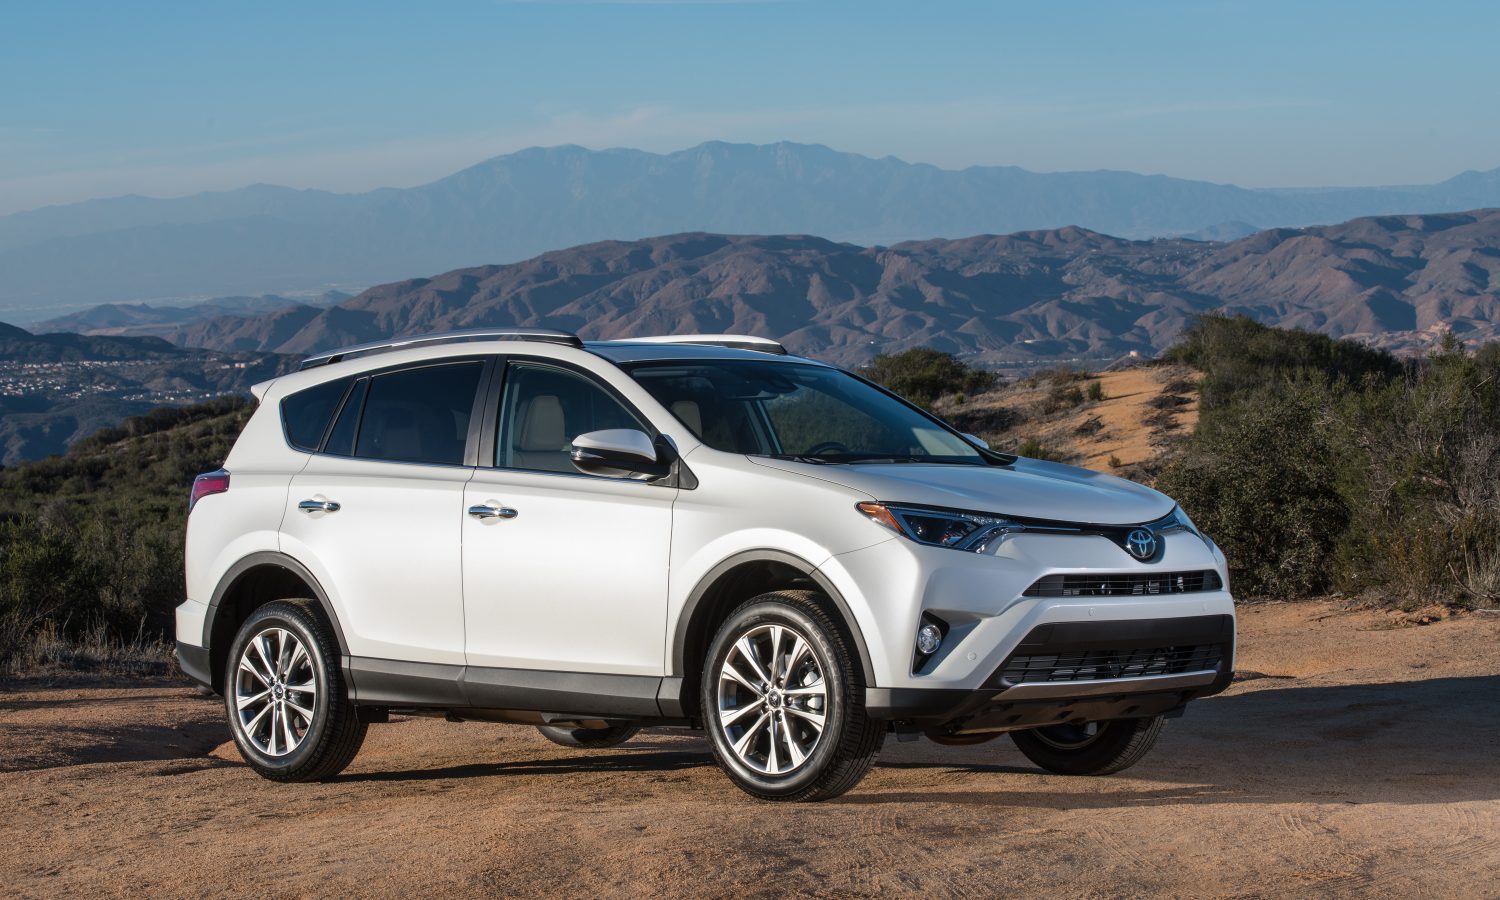 Popular 2017 Toyota RAV4 Crossover Receives Added Value With New Pricing -  Toyota USA Newsroom